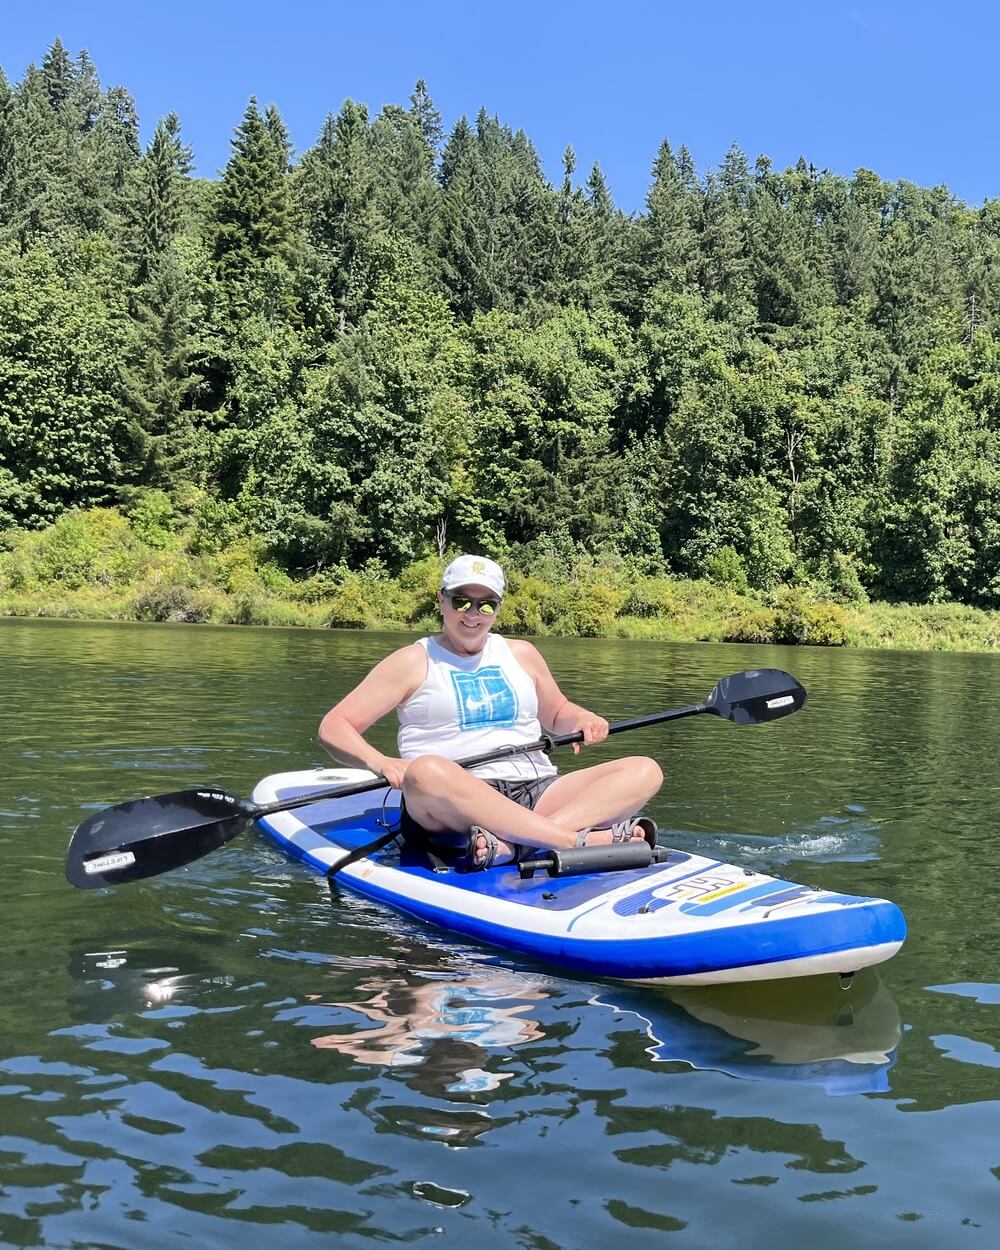 Coach out of the river, sitting and smiling on a paddle boat.